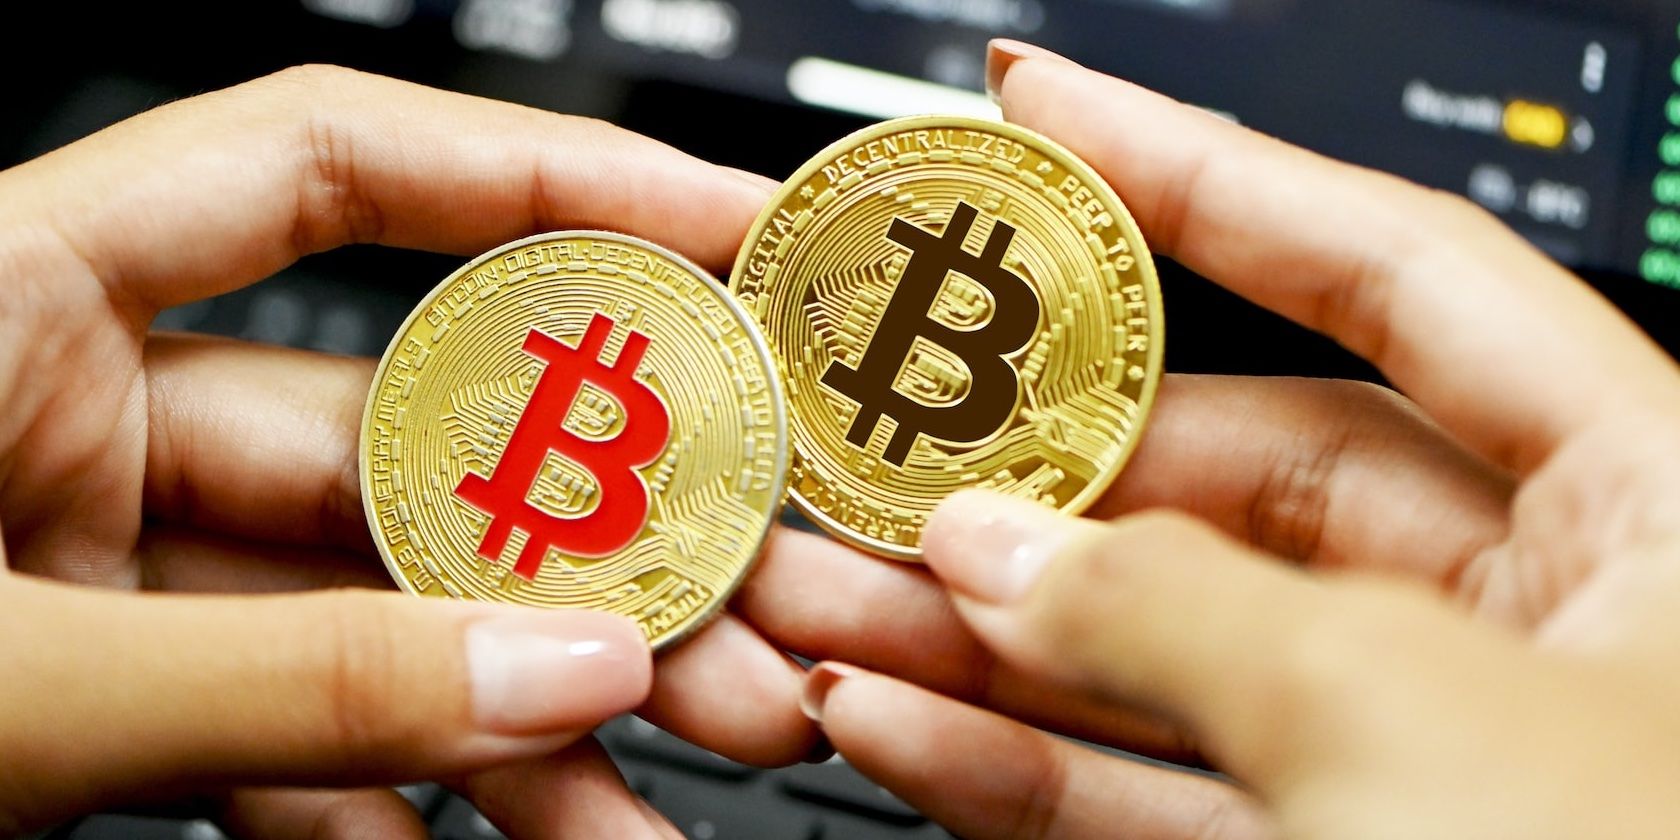 two hands holding red and black bitcoin tokens